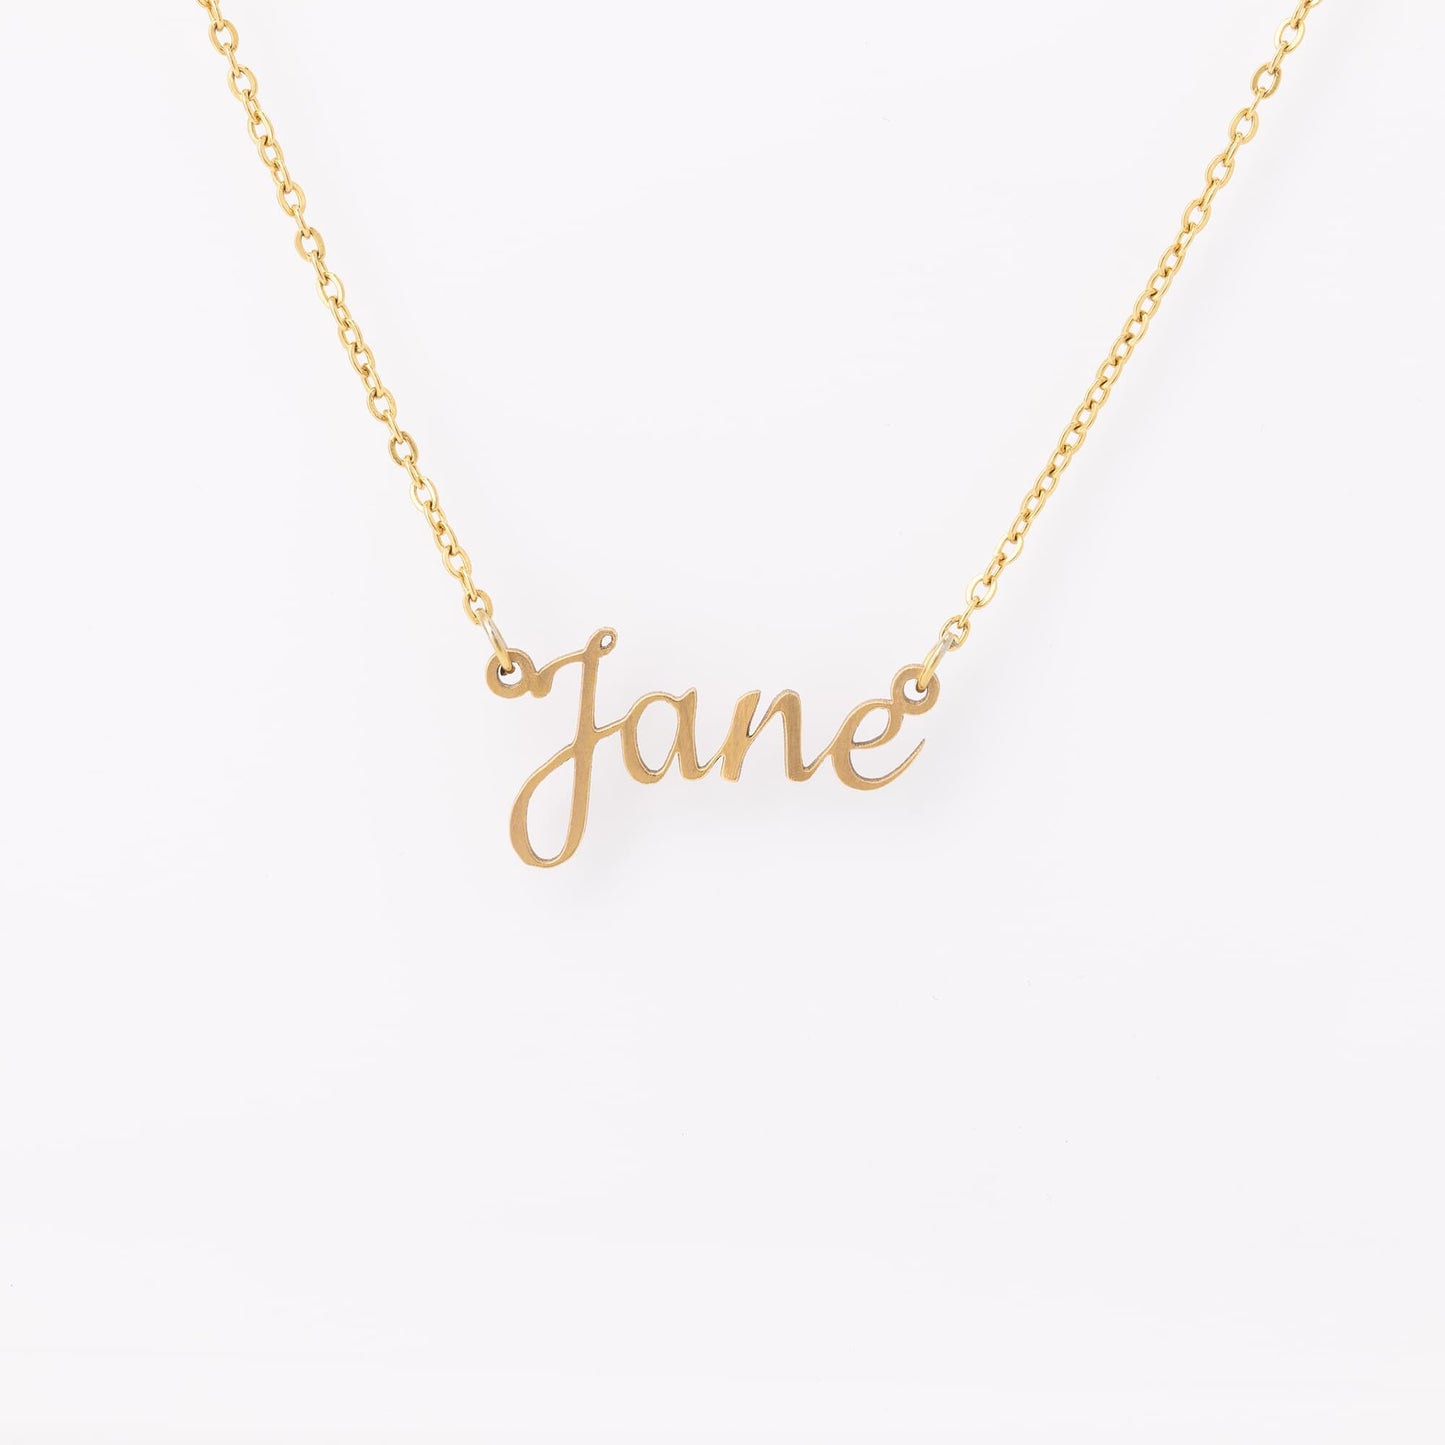 Personalized Name Necklace Gift, Christmas Gift for Wife or Girlfriend, Birthday Gift For Her, Custom Name Necklace Gift, Meaningful Gift, Personalized Women Jewelry.